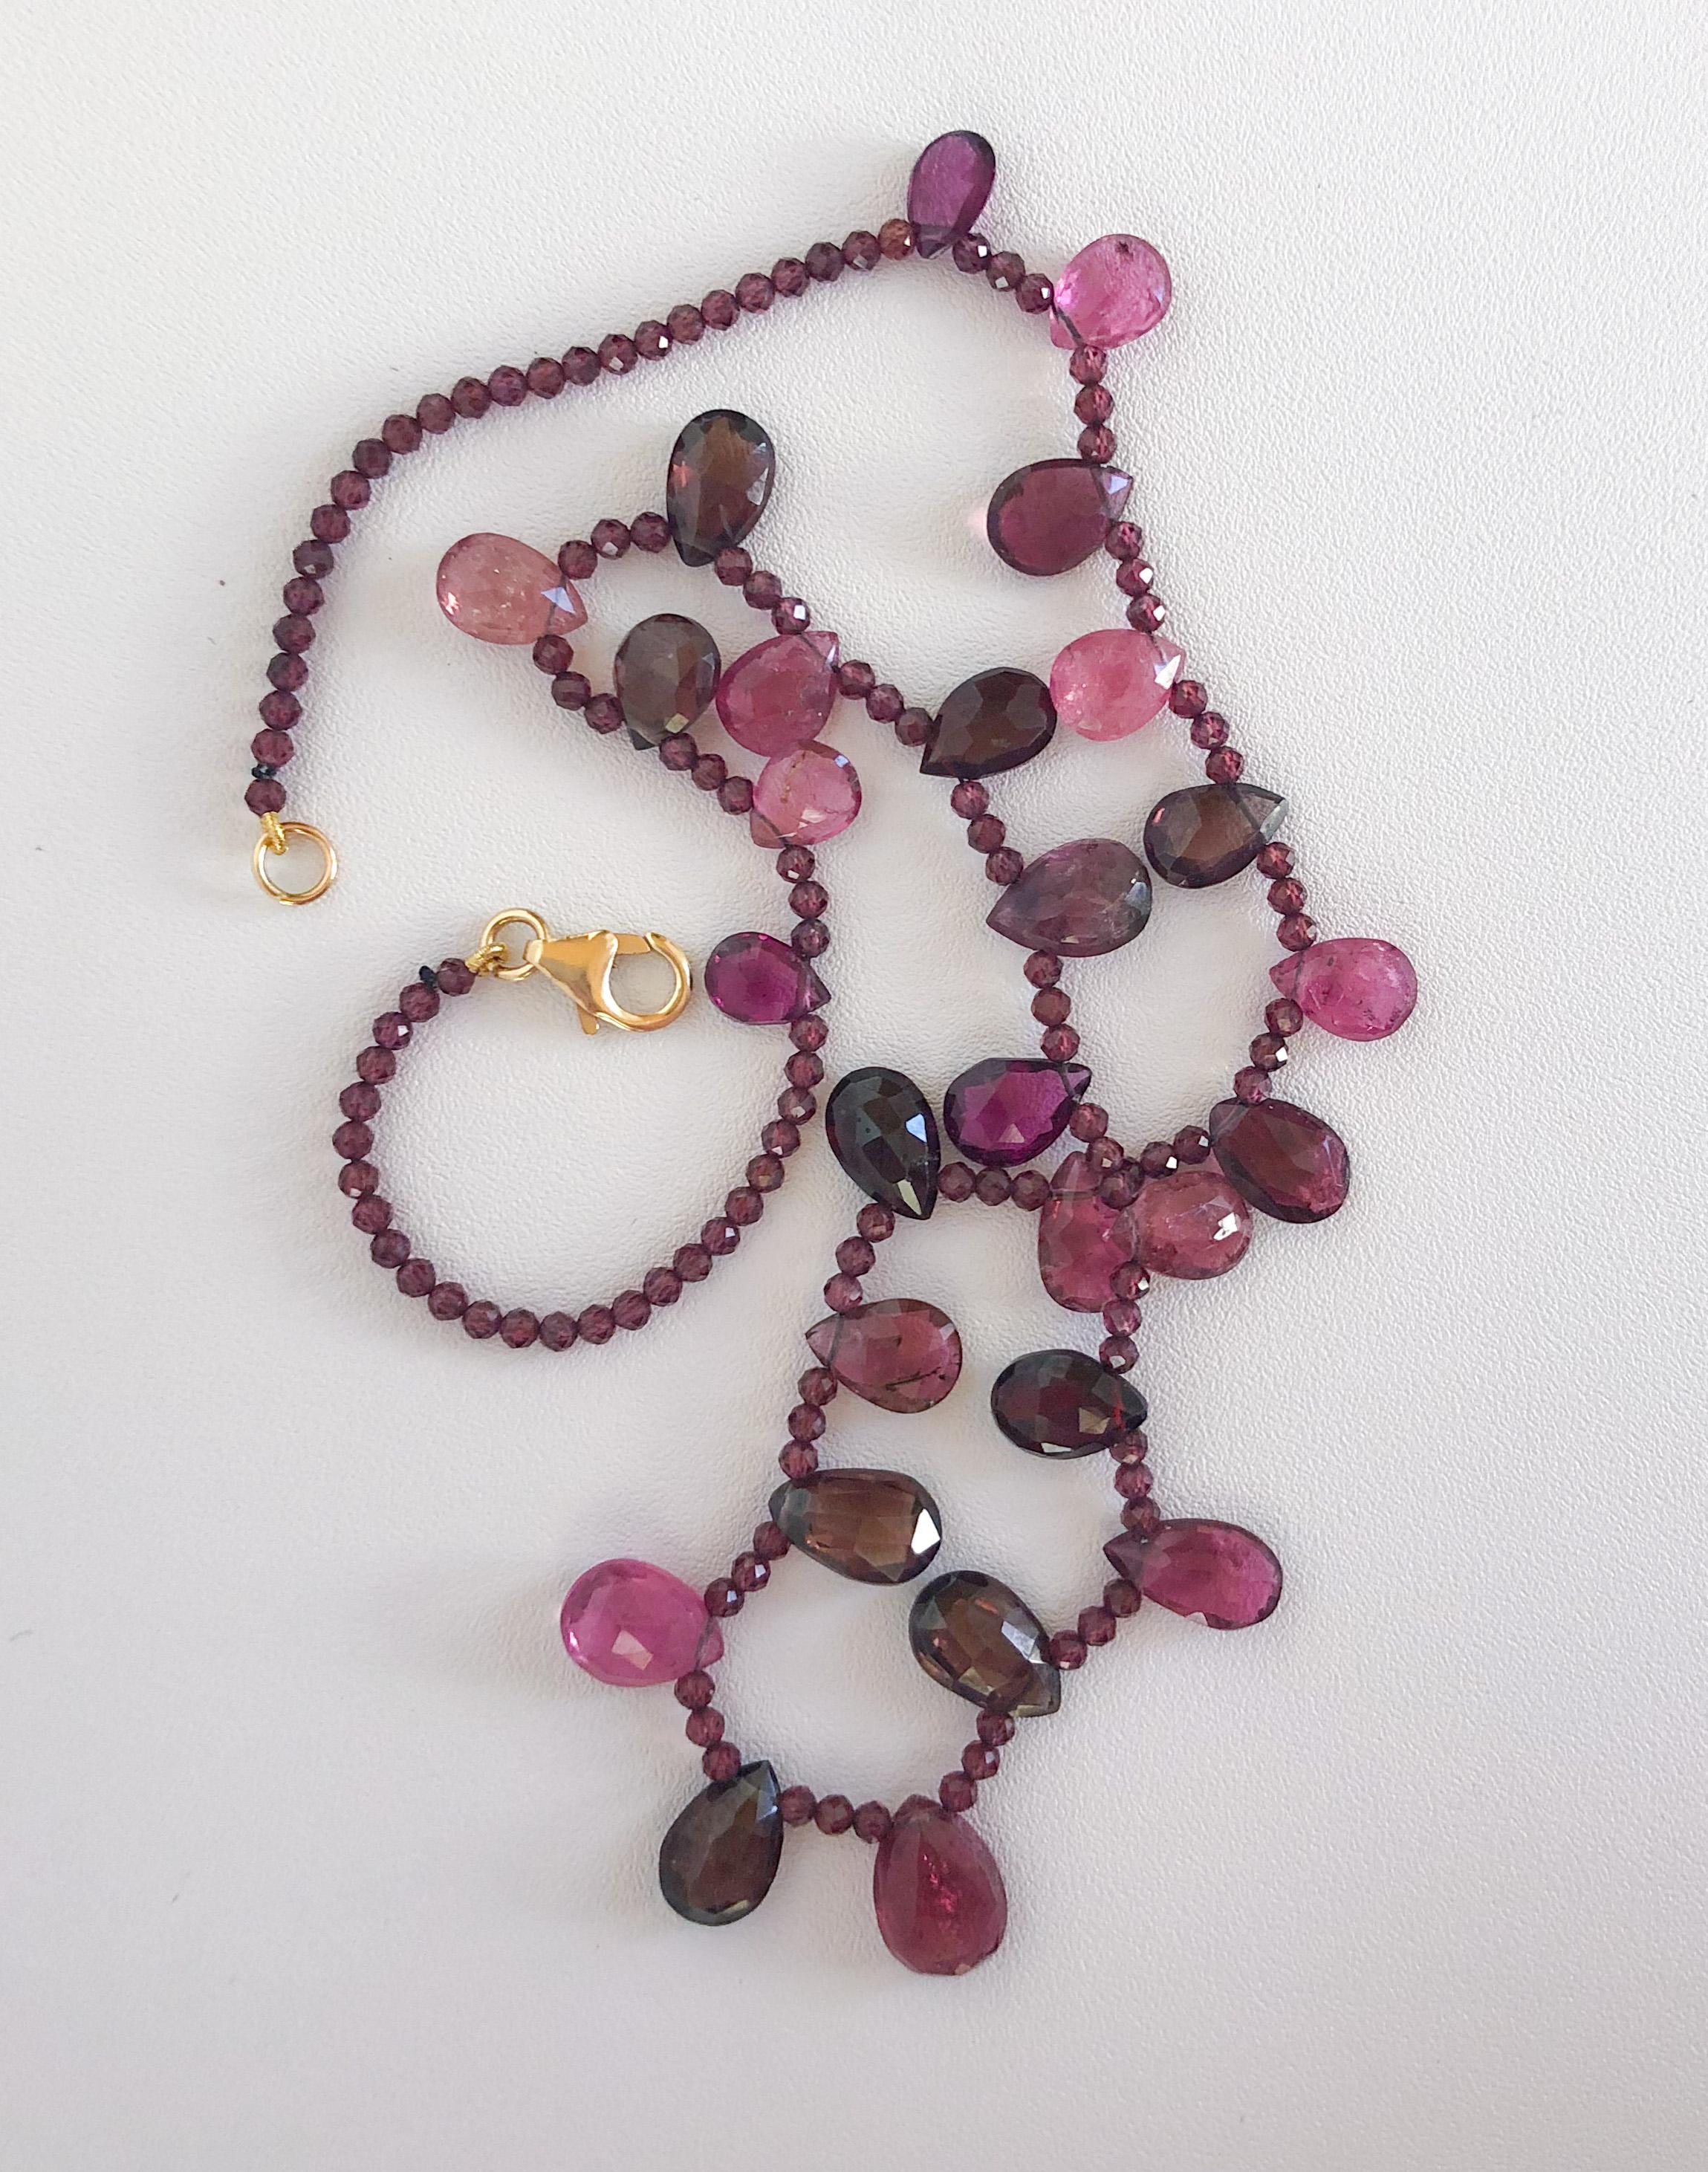 Marina J. Garnet and Multicolored Pink Tourmaline Necklace with Silver Clasp In New Condition For Sale In Los Angeles, CA